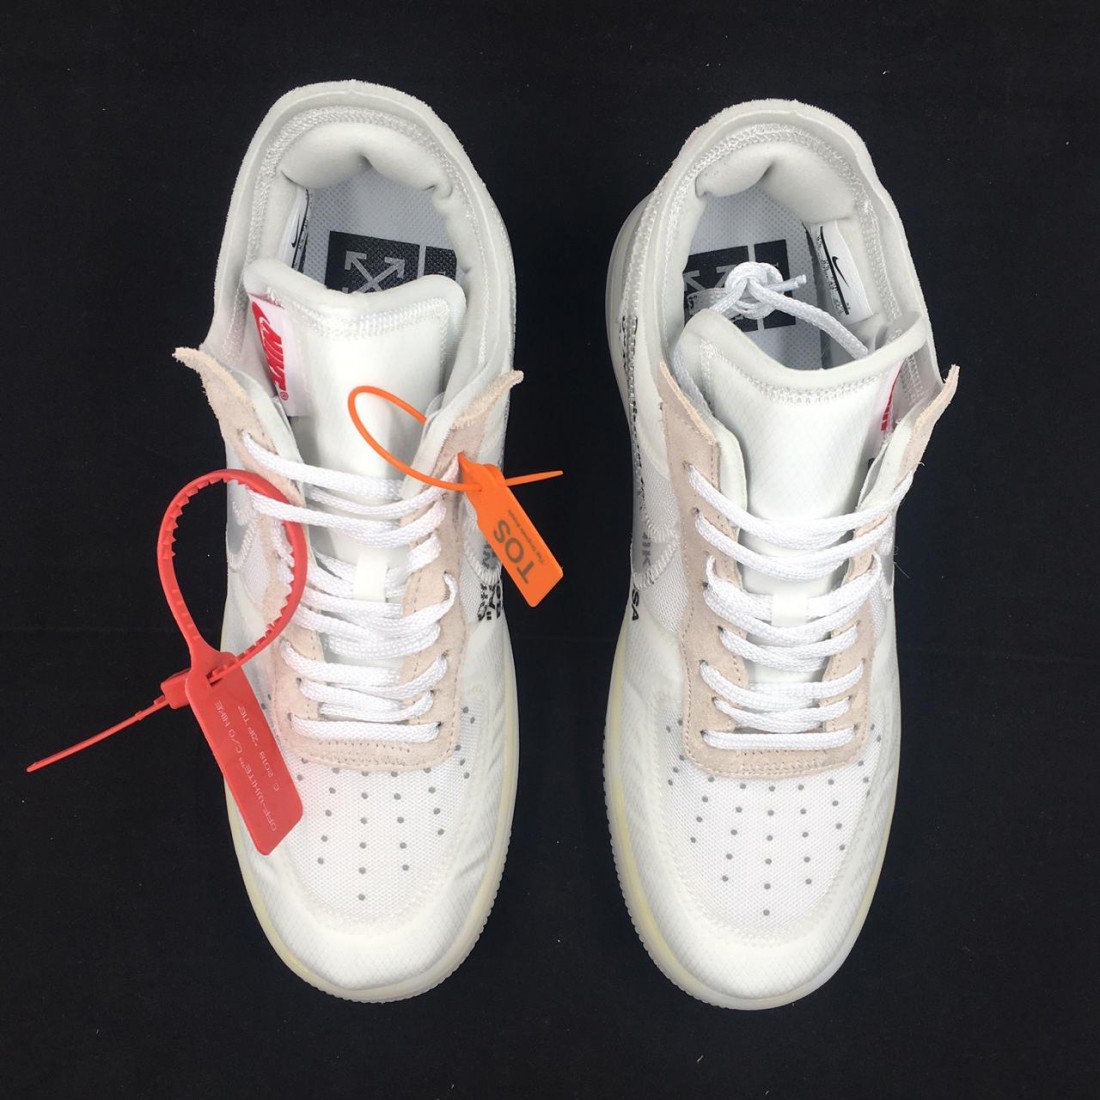 Marchito extremadamente gasolina Air Force 1 Low X Off-White Ghosting